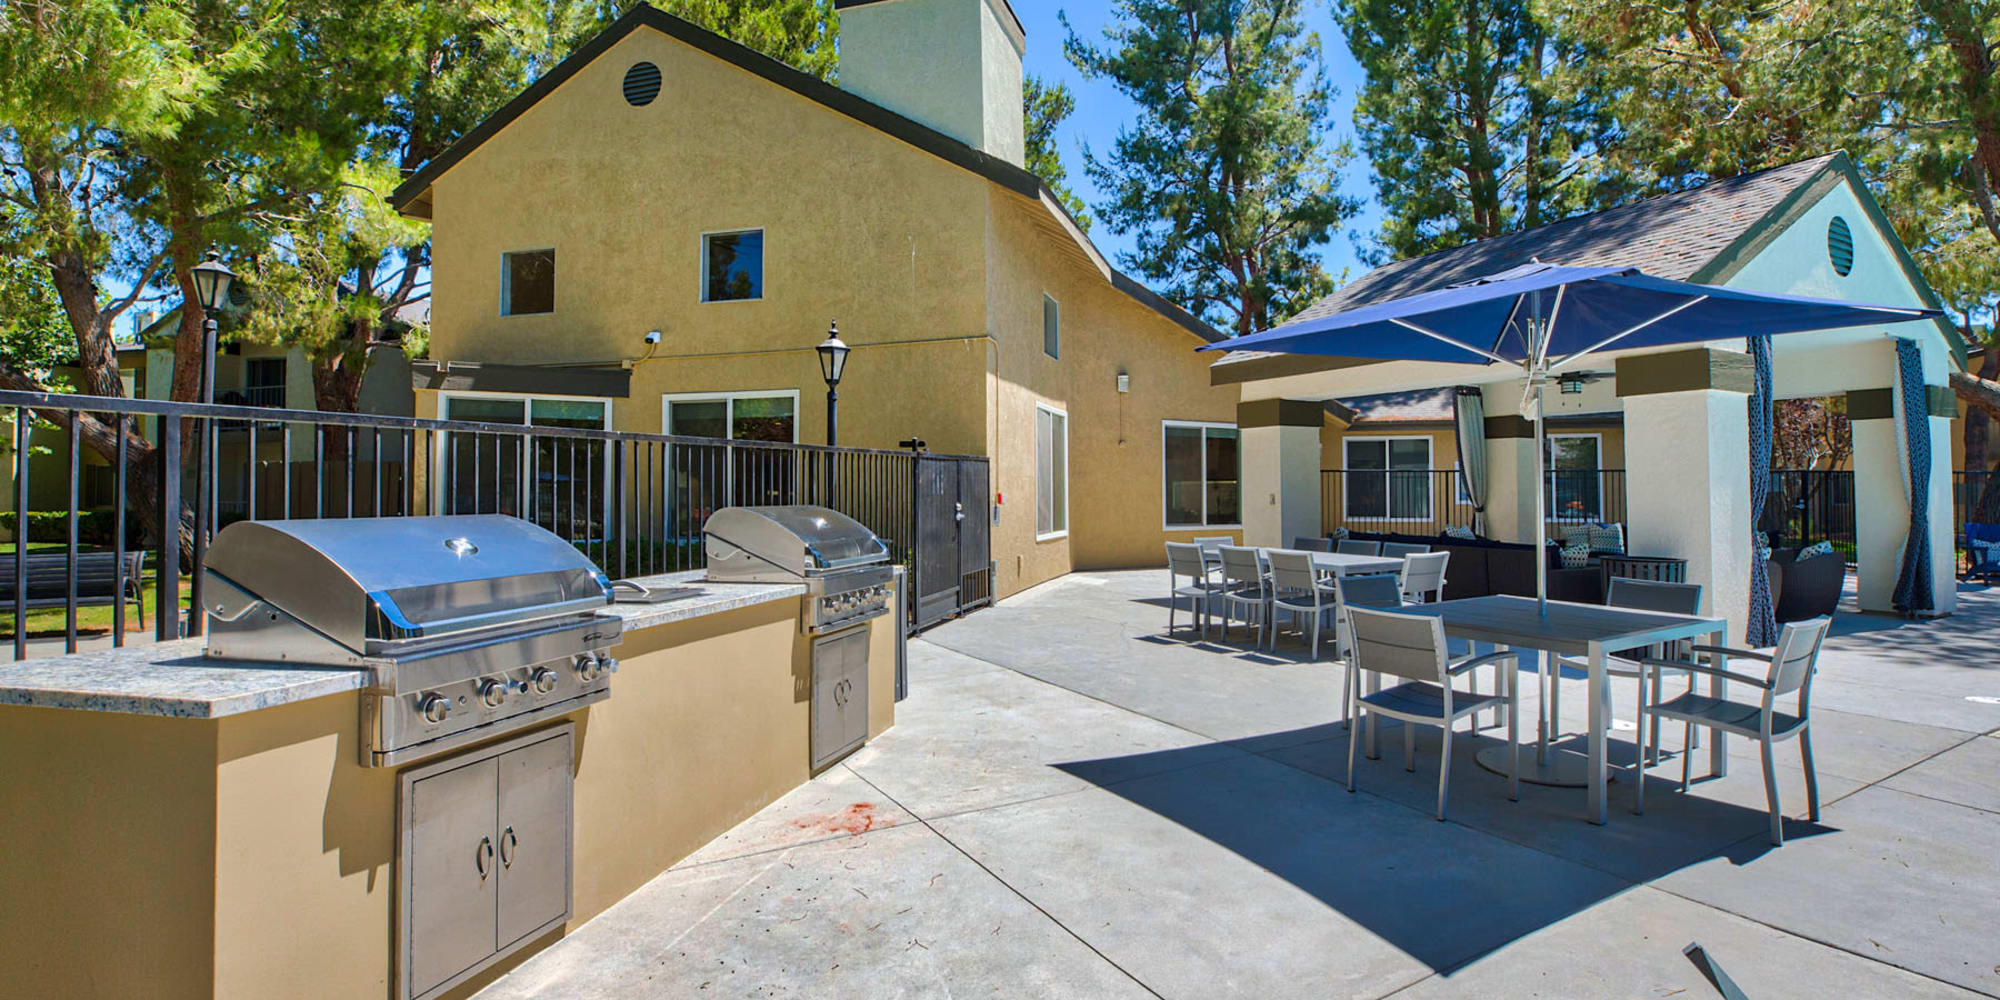 Grill and picnic area at Mountain Vista in Victorville, California